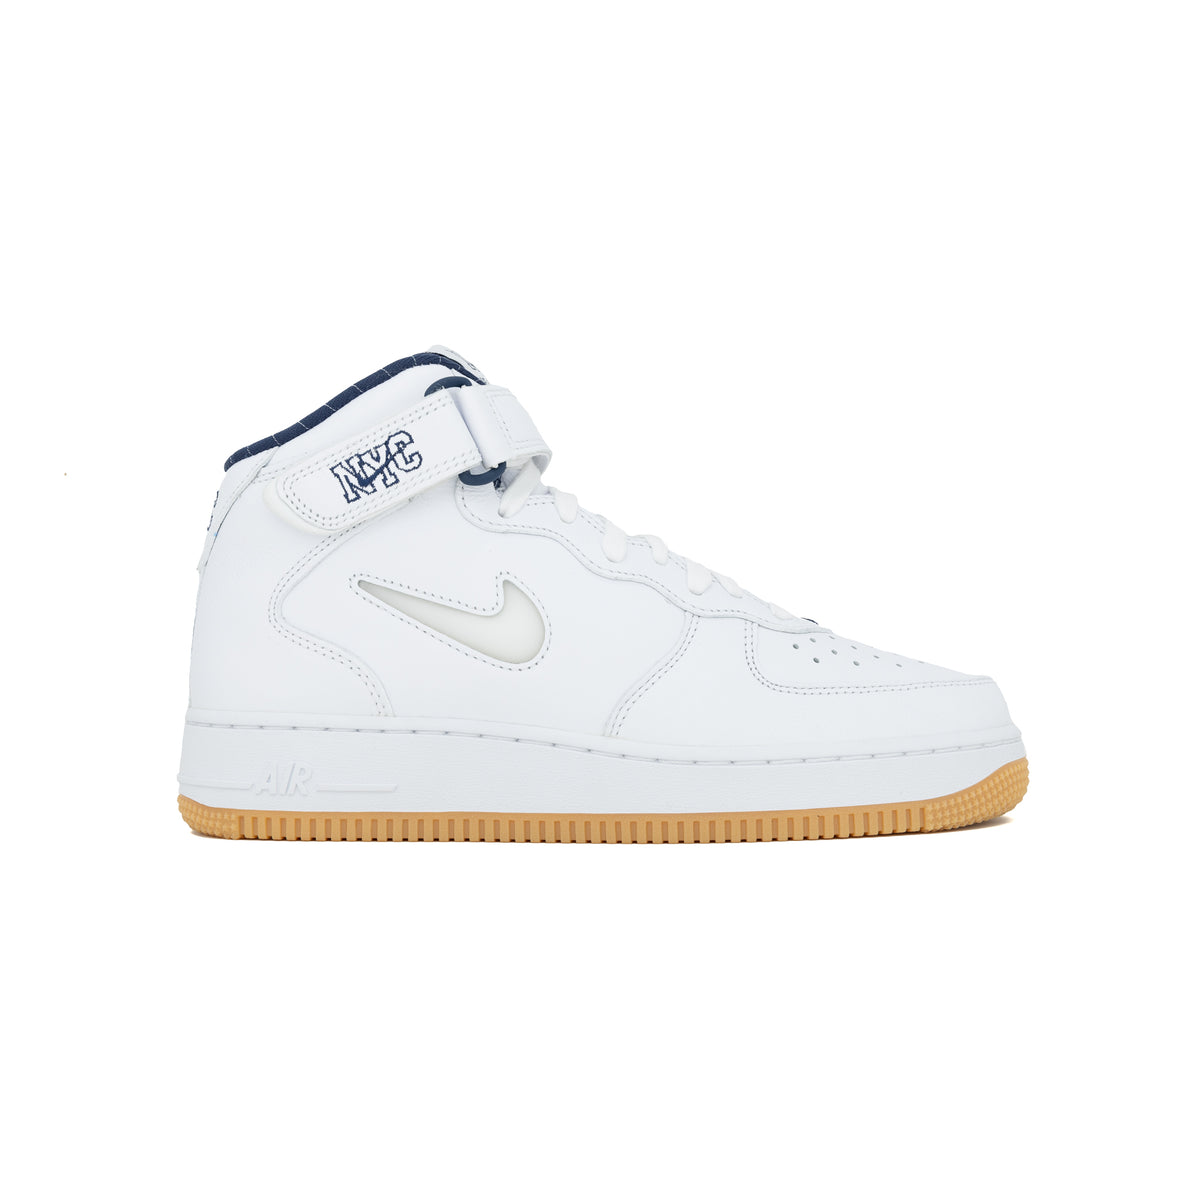 Nike Air Force 1 Mid Jewel NYC White Navy Blue Gum Men Size 11 Shoes  Yankees